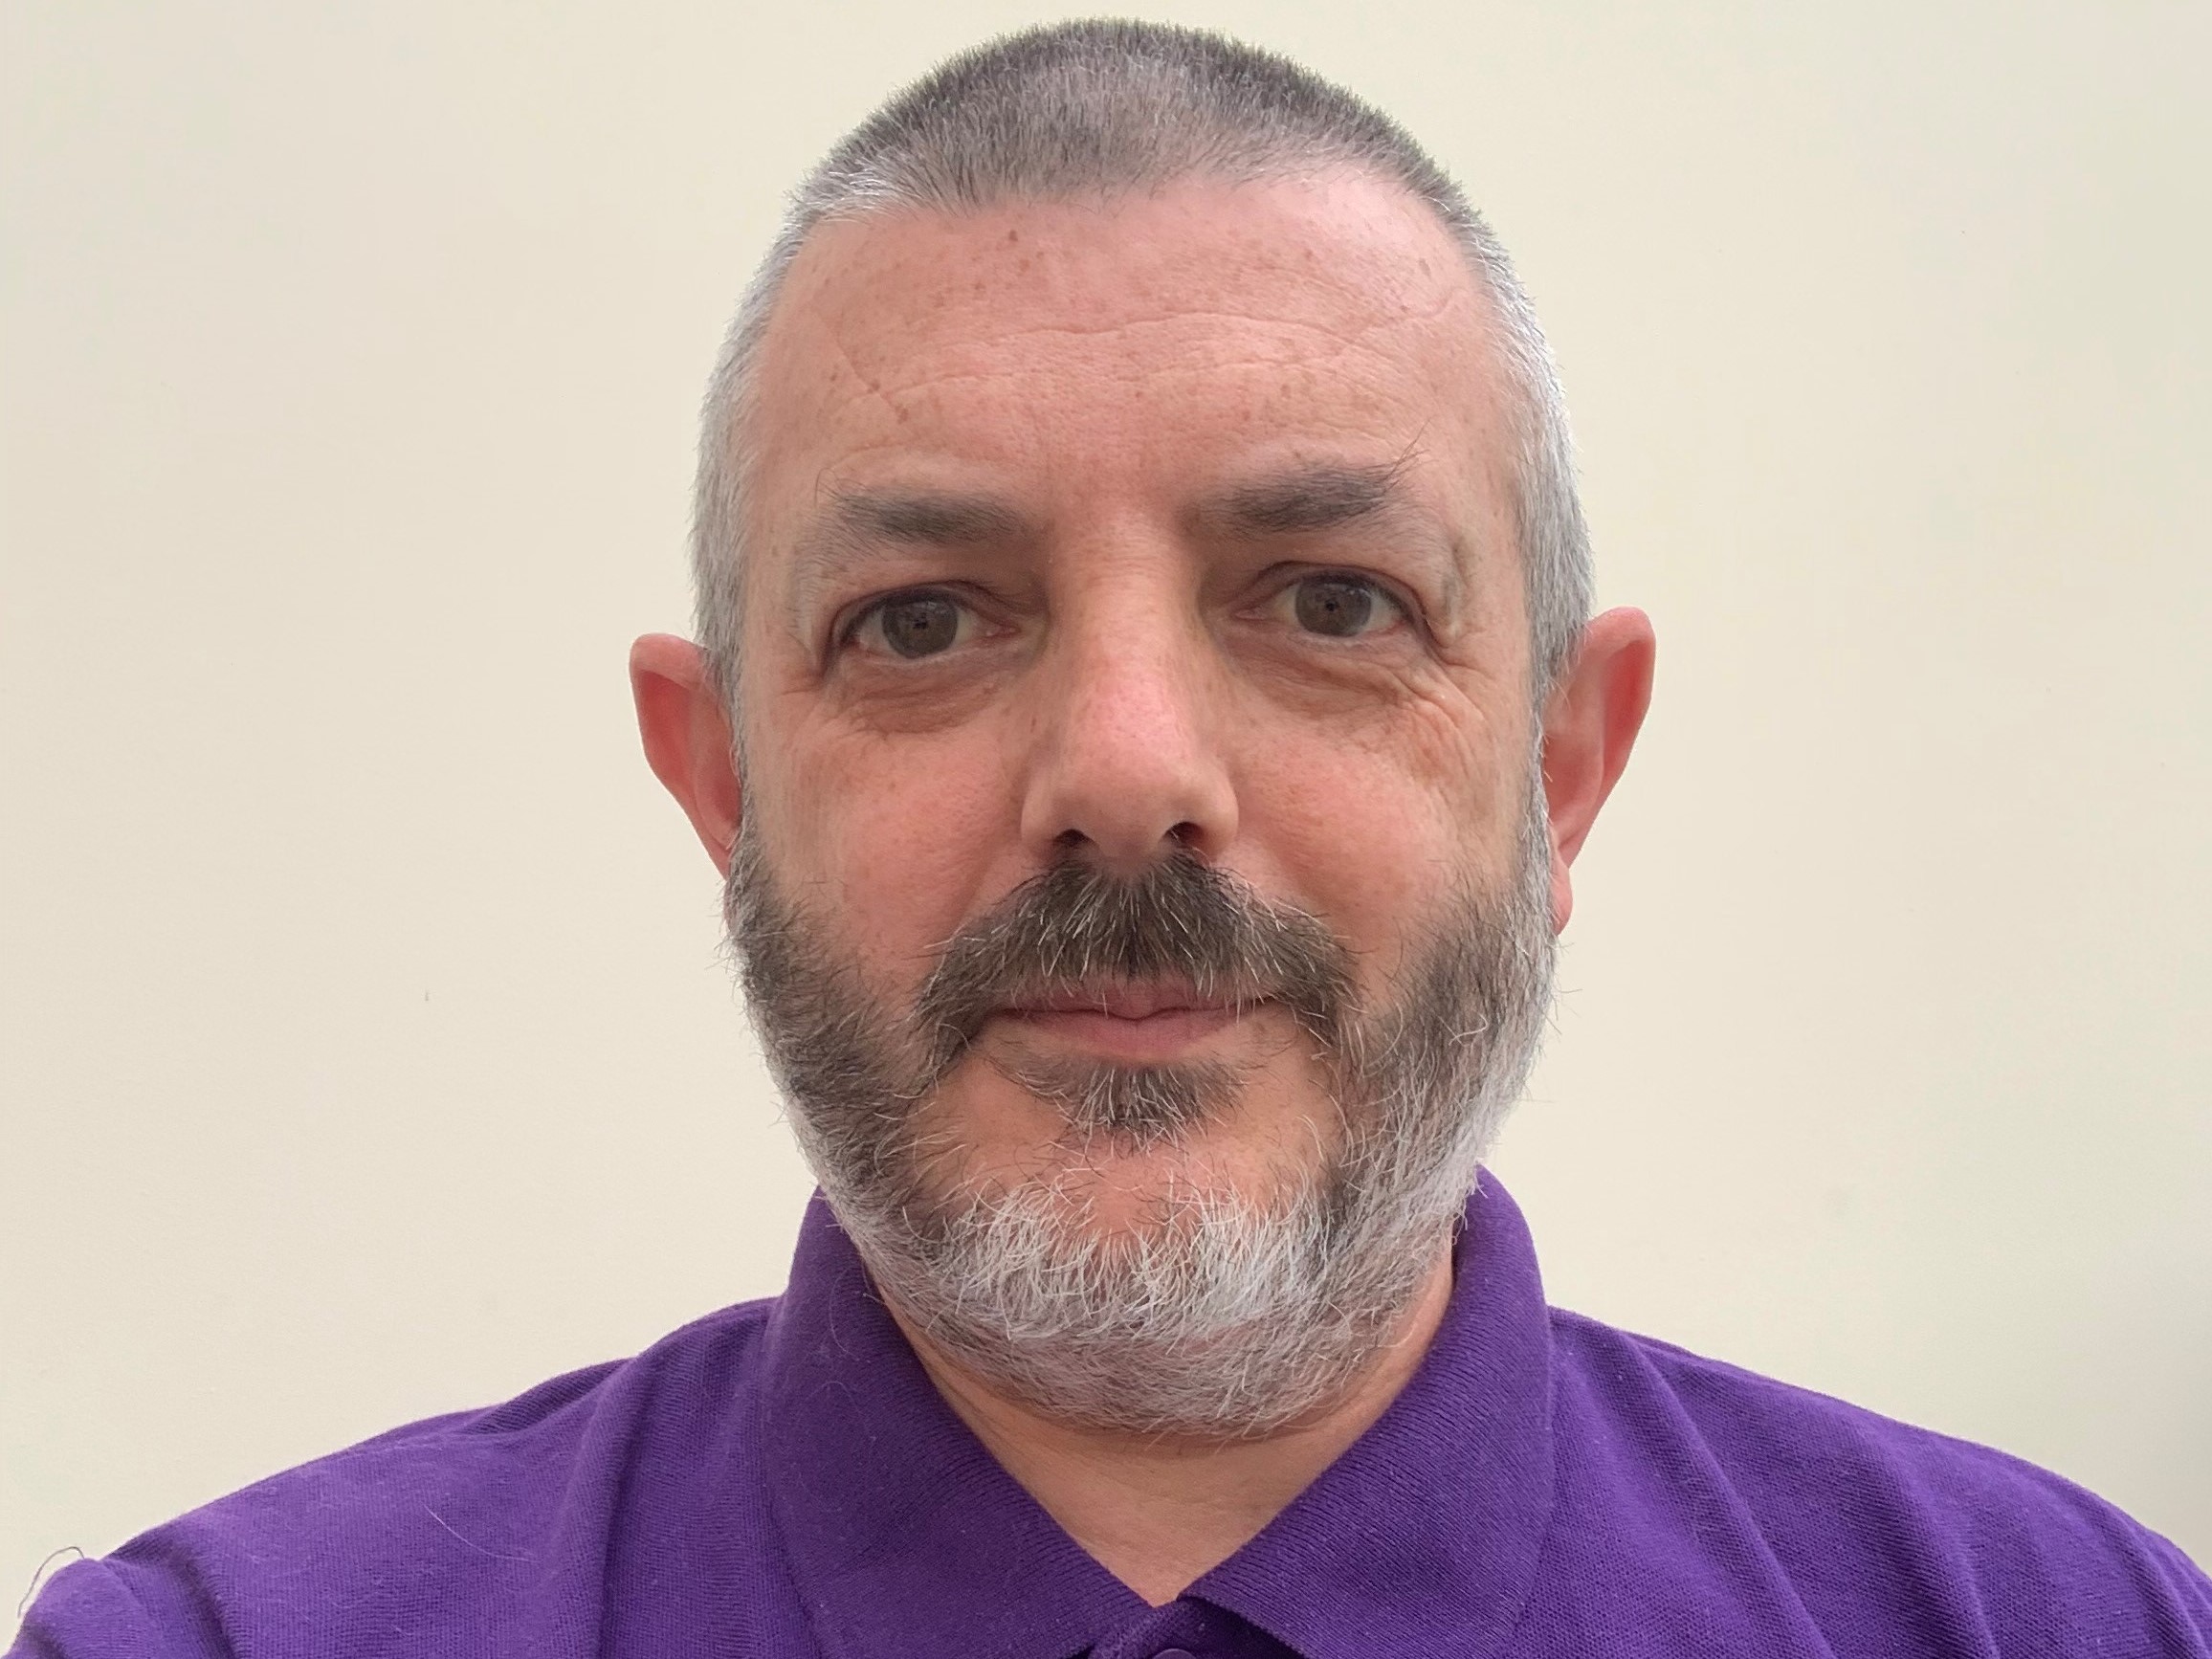 A man with short grey hair and a beard, wearing a purple top.